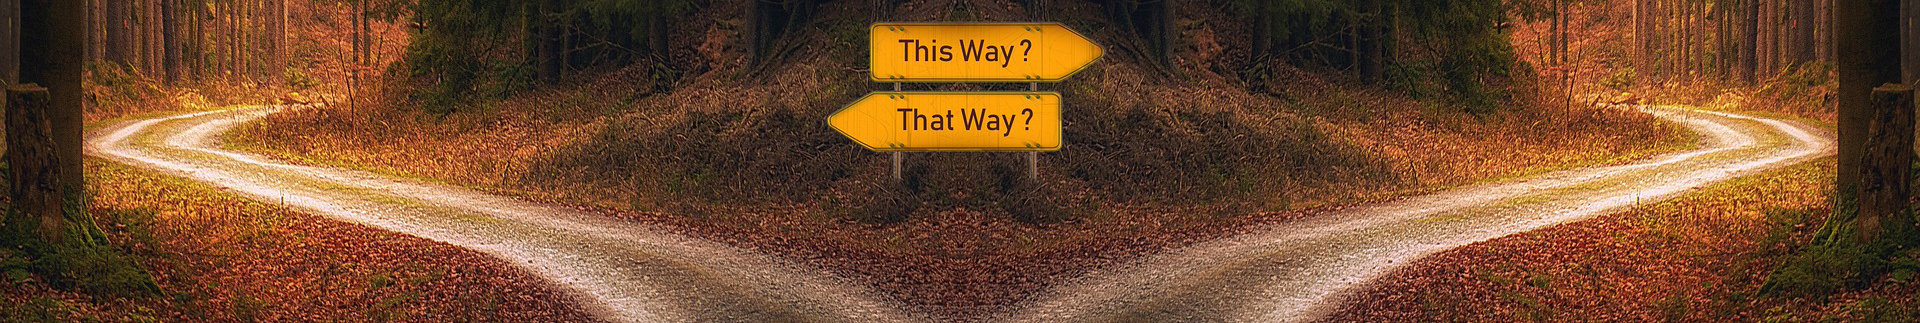 Thisthatway